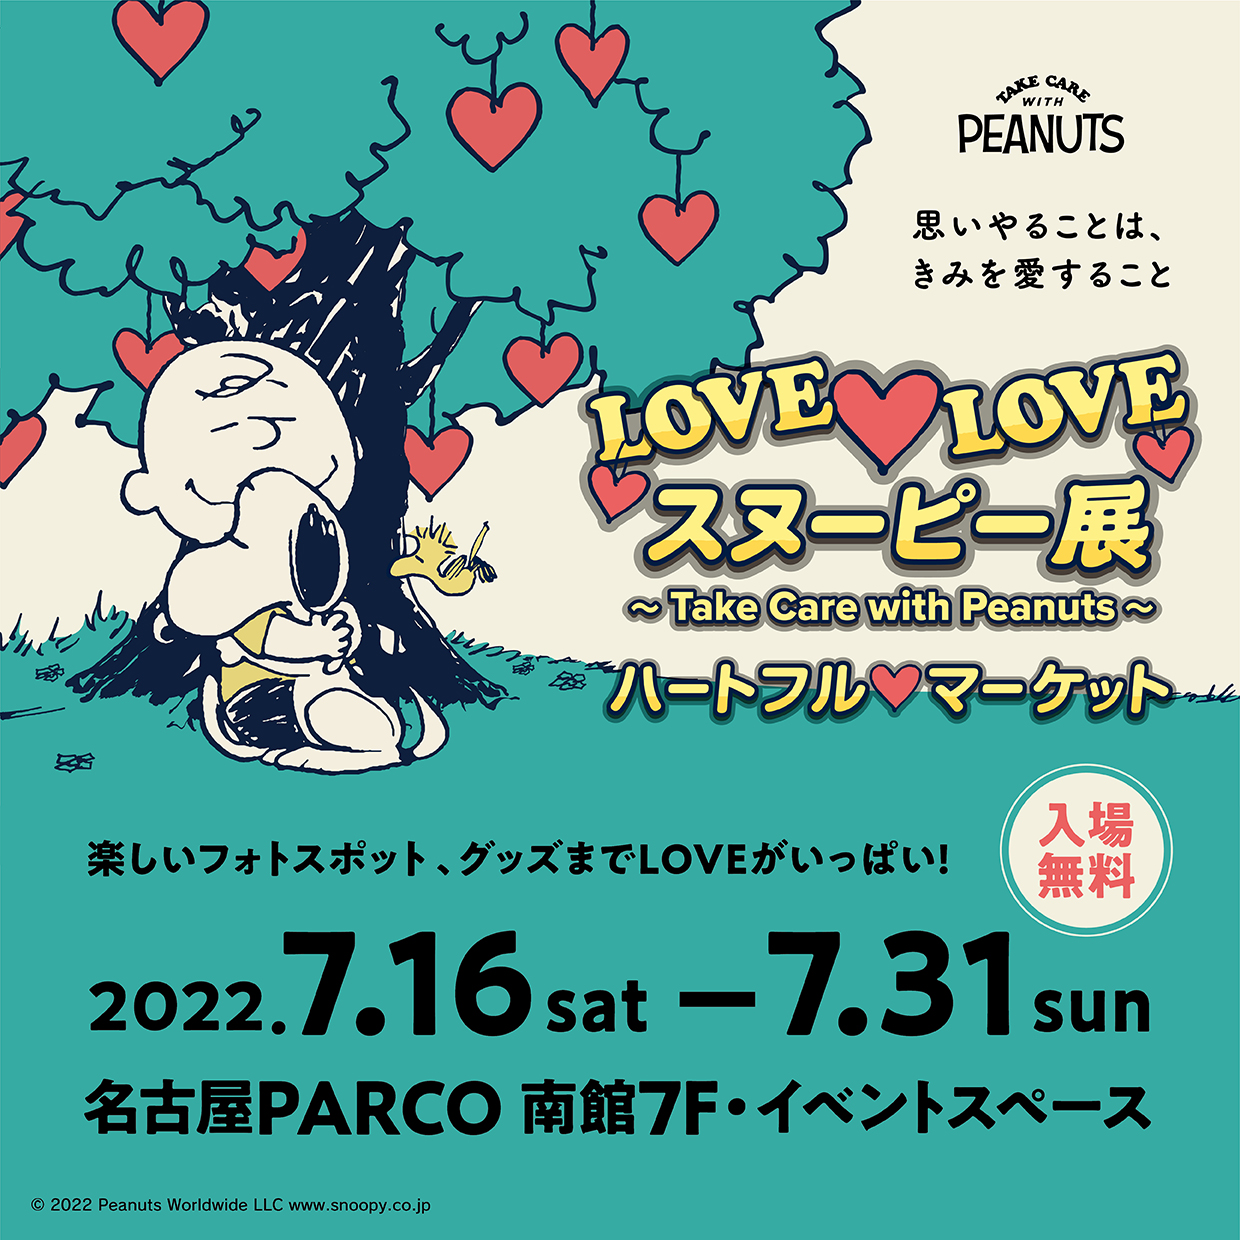 Love Love スヌーピー展 Take Care With Peanuts ハート フルマーケット 名古屋parcoにて開催 イベント限定グッズを数々販売 株式会社パルコのプレスリリース